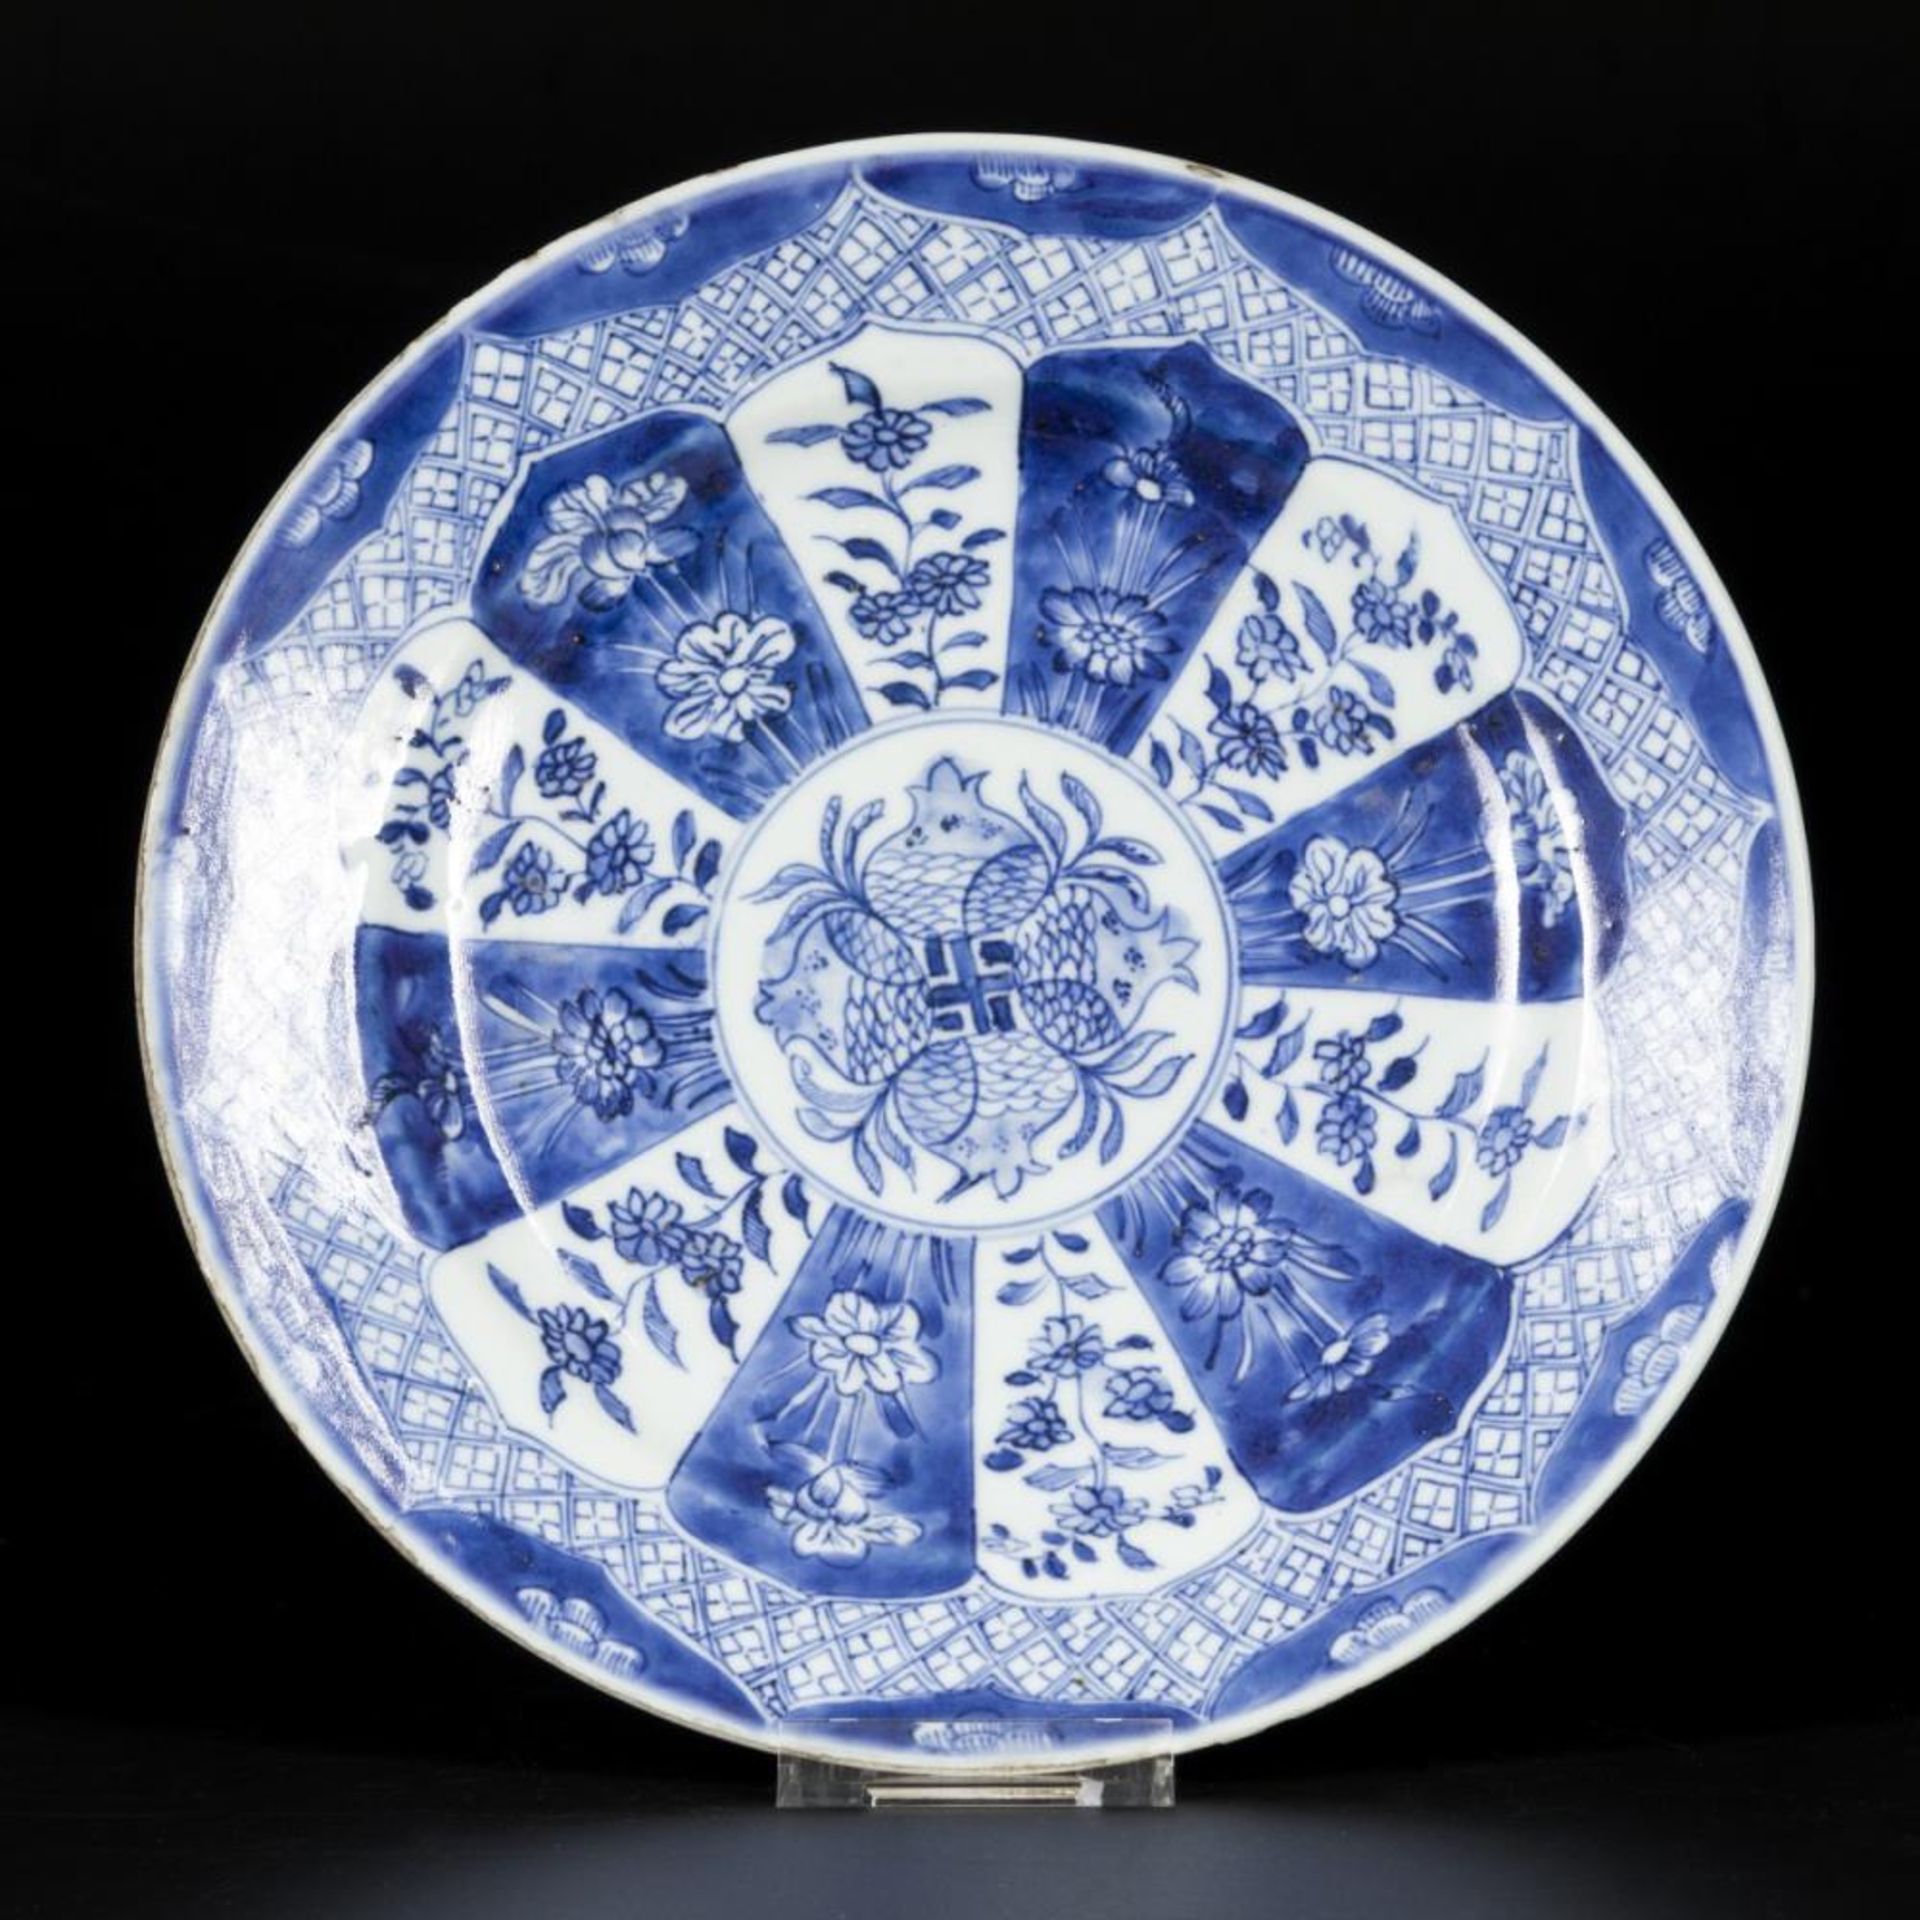 A porcelain plate with lotus leaf decor, pomegranate decor in the center, China, 18th century.